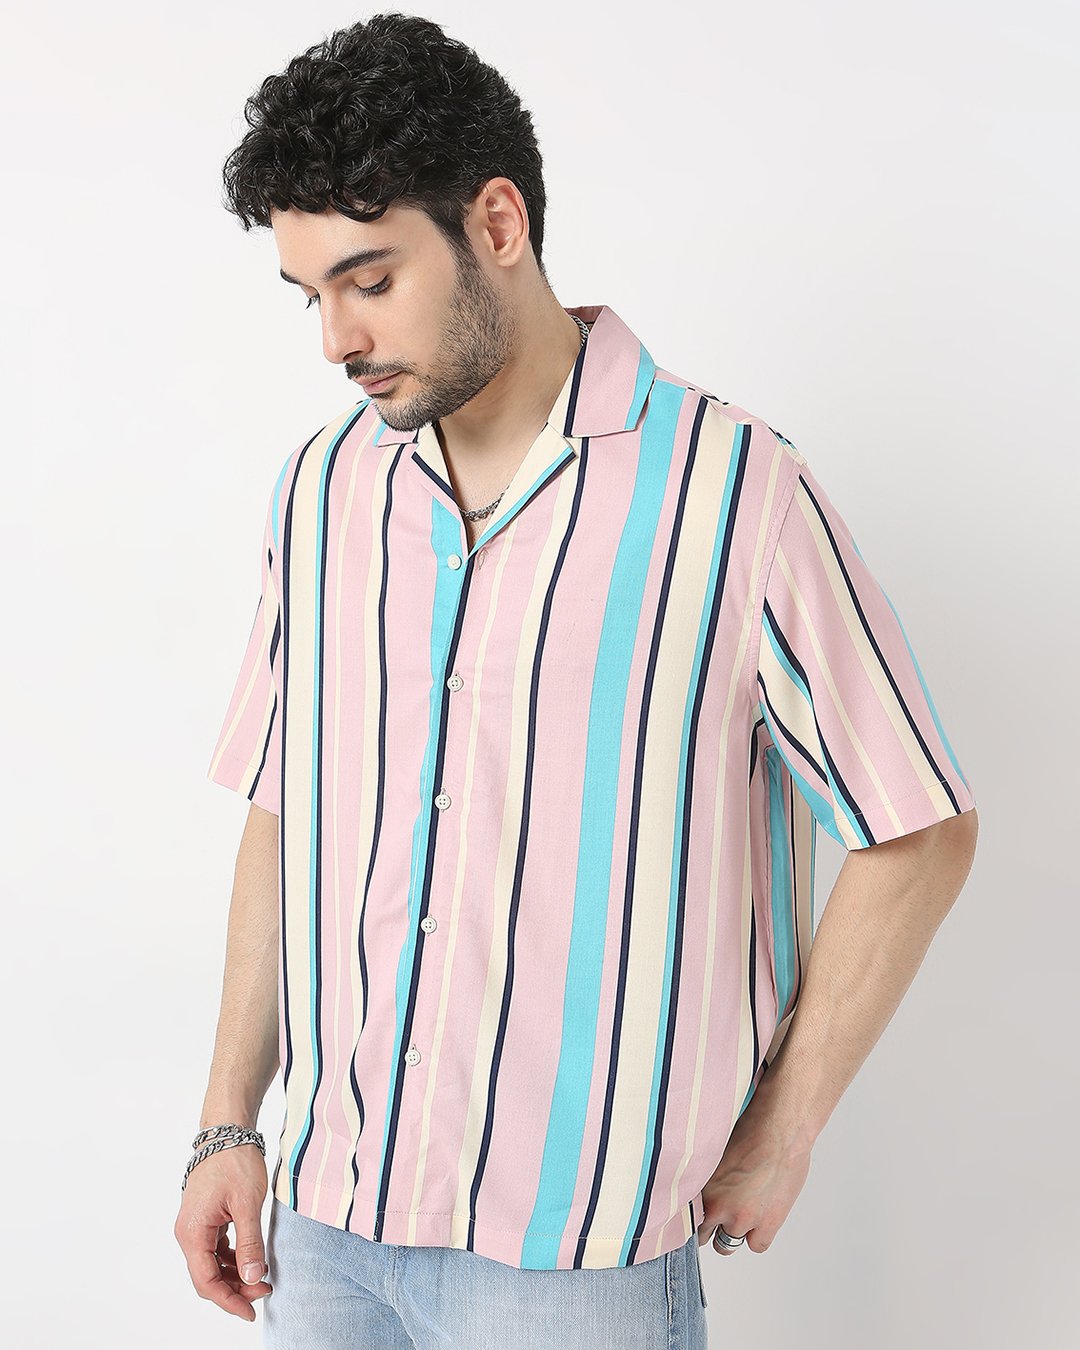 Multicolored Thick and Thin Striped Drop-shoulder Half Sleeve Rayon Shirt